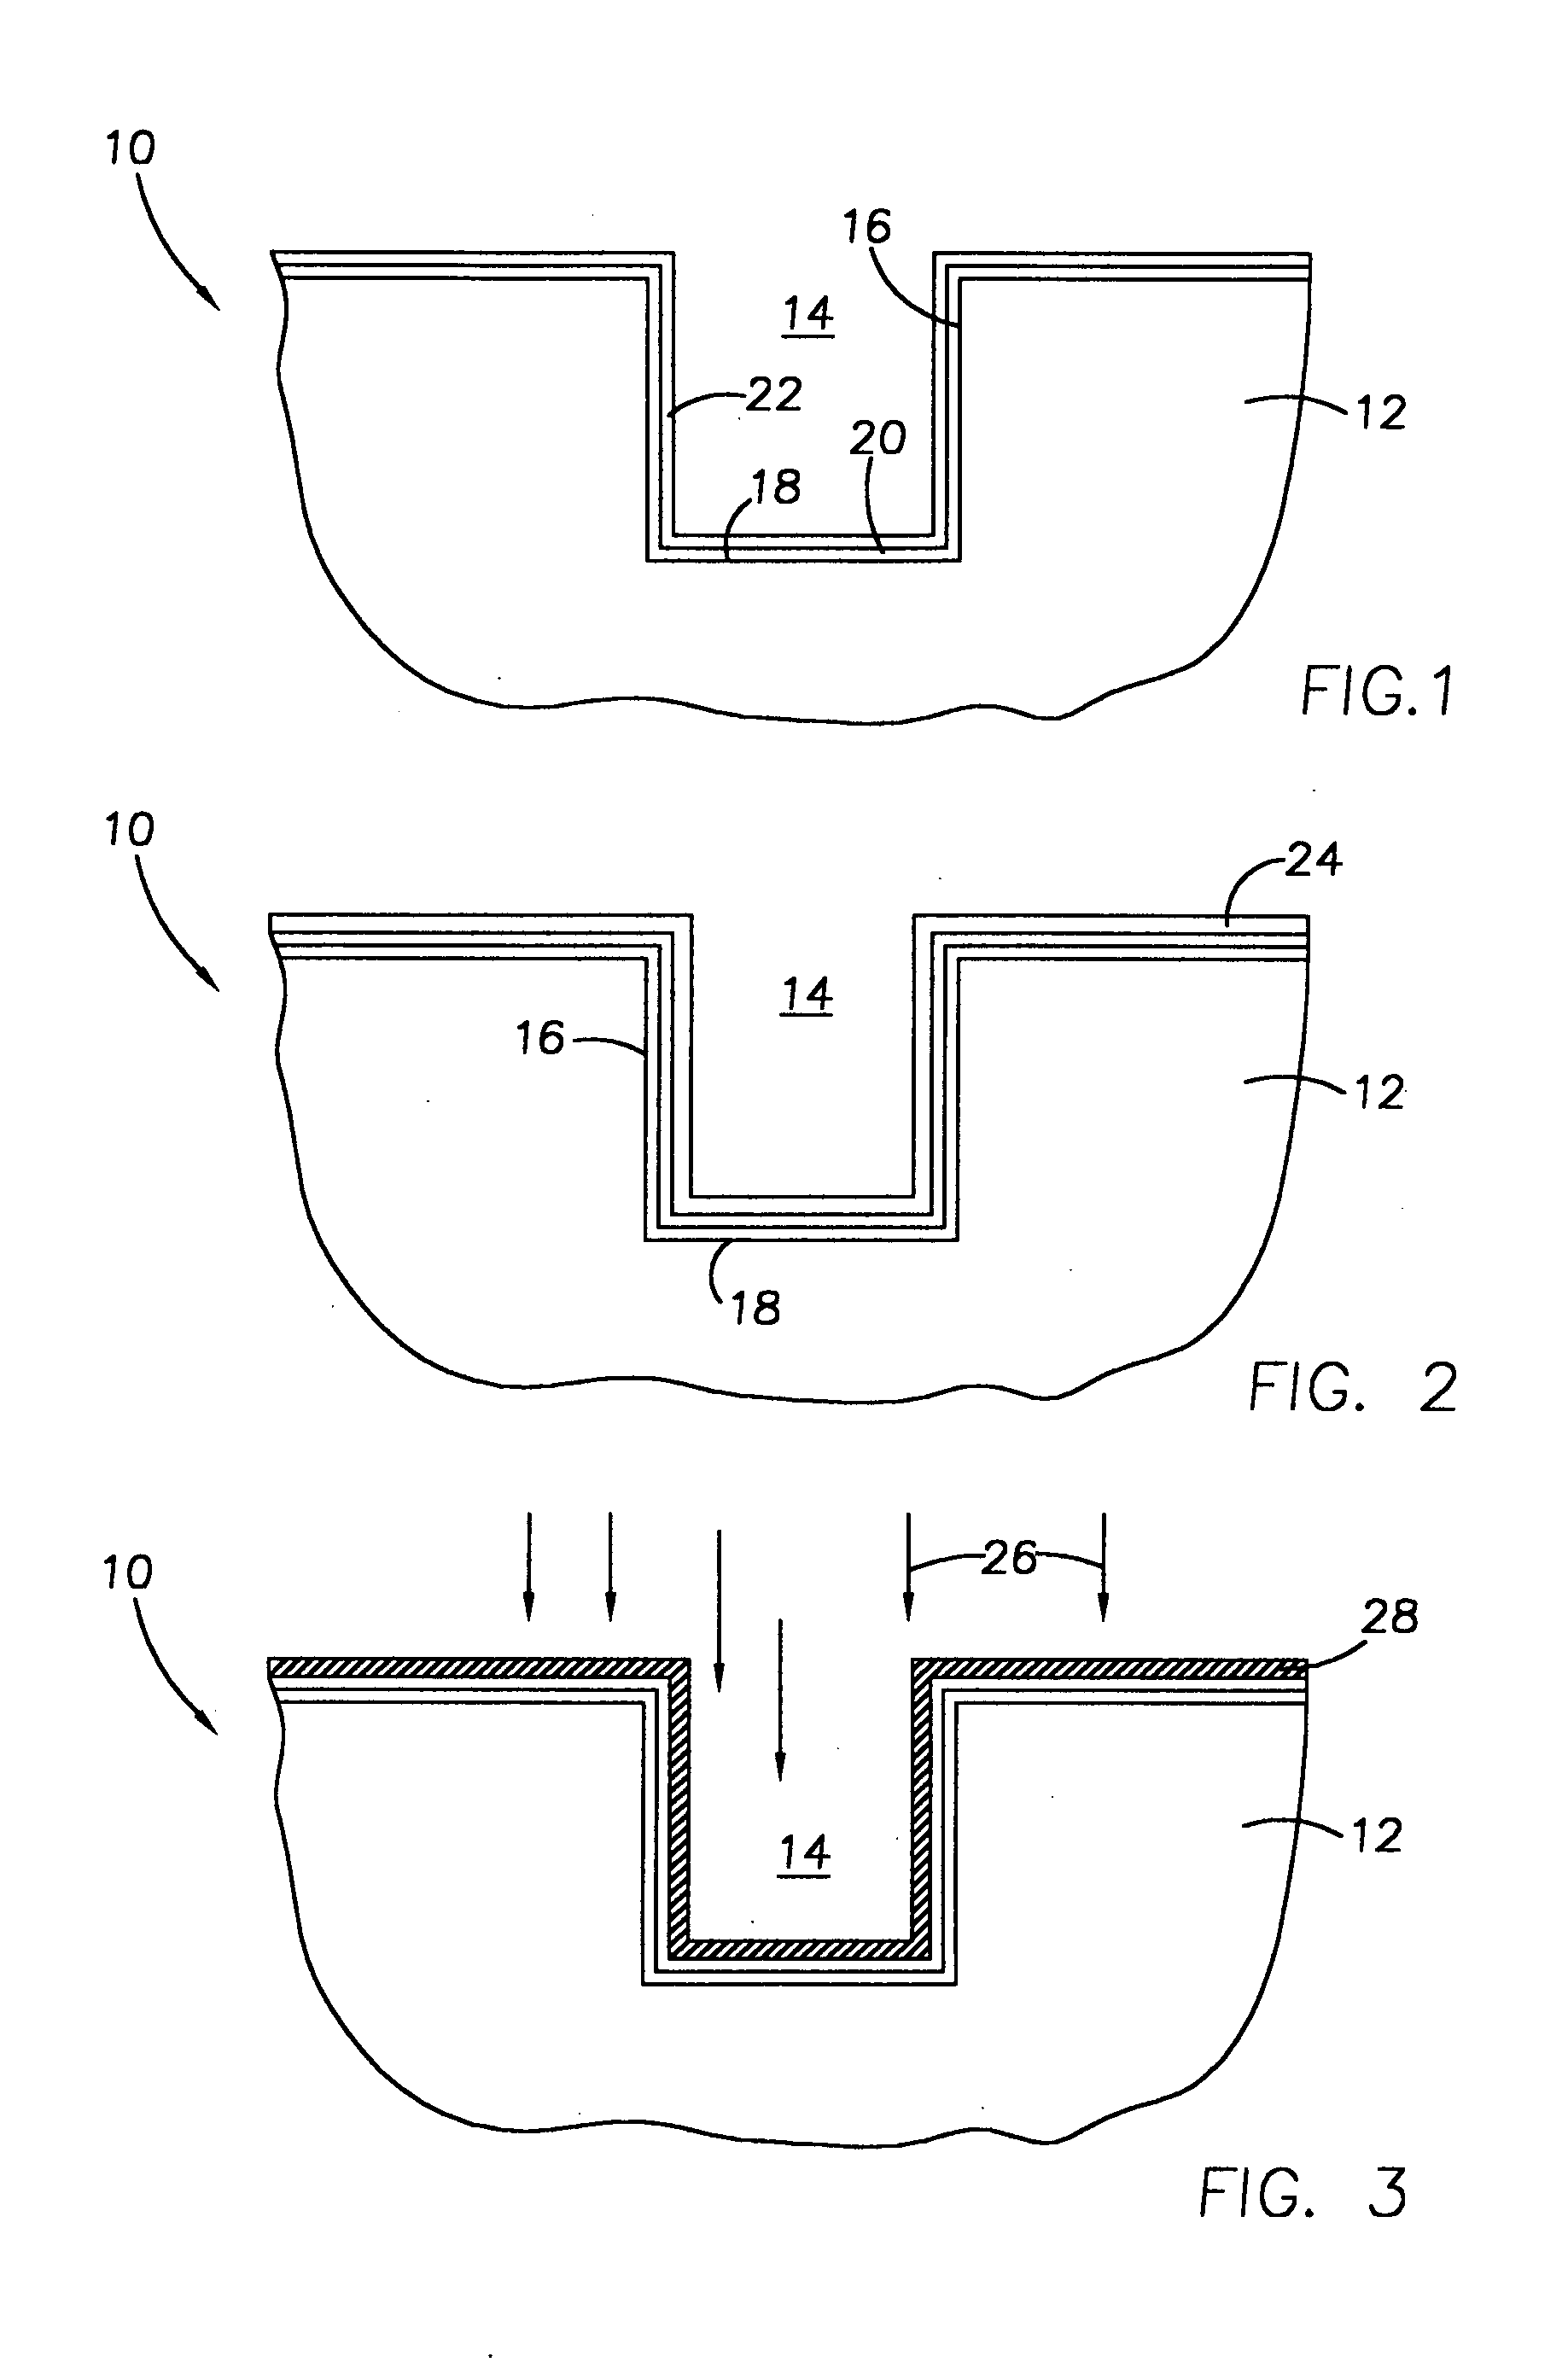 Method of increasing deposition rate of silicon dioxide on a catalyst